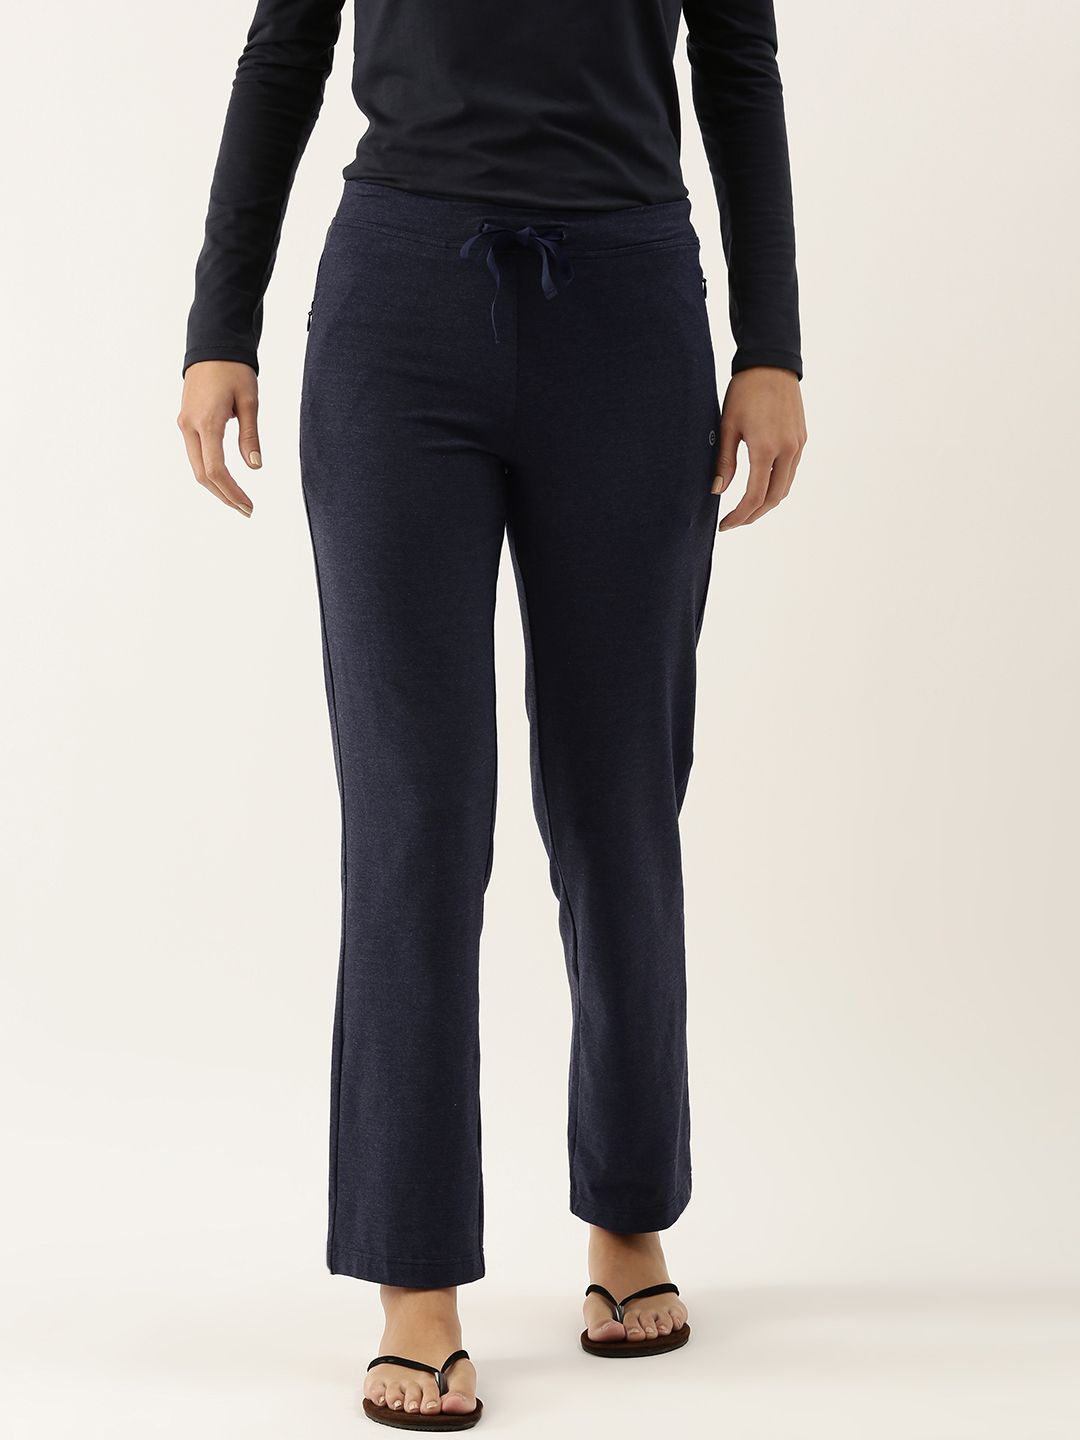 Enamor Womens Navy Blue Cotton Spandex Lounge Pants Price in India